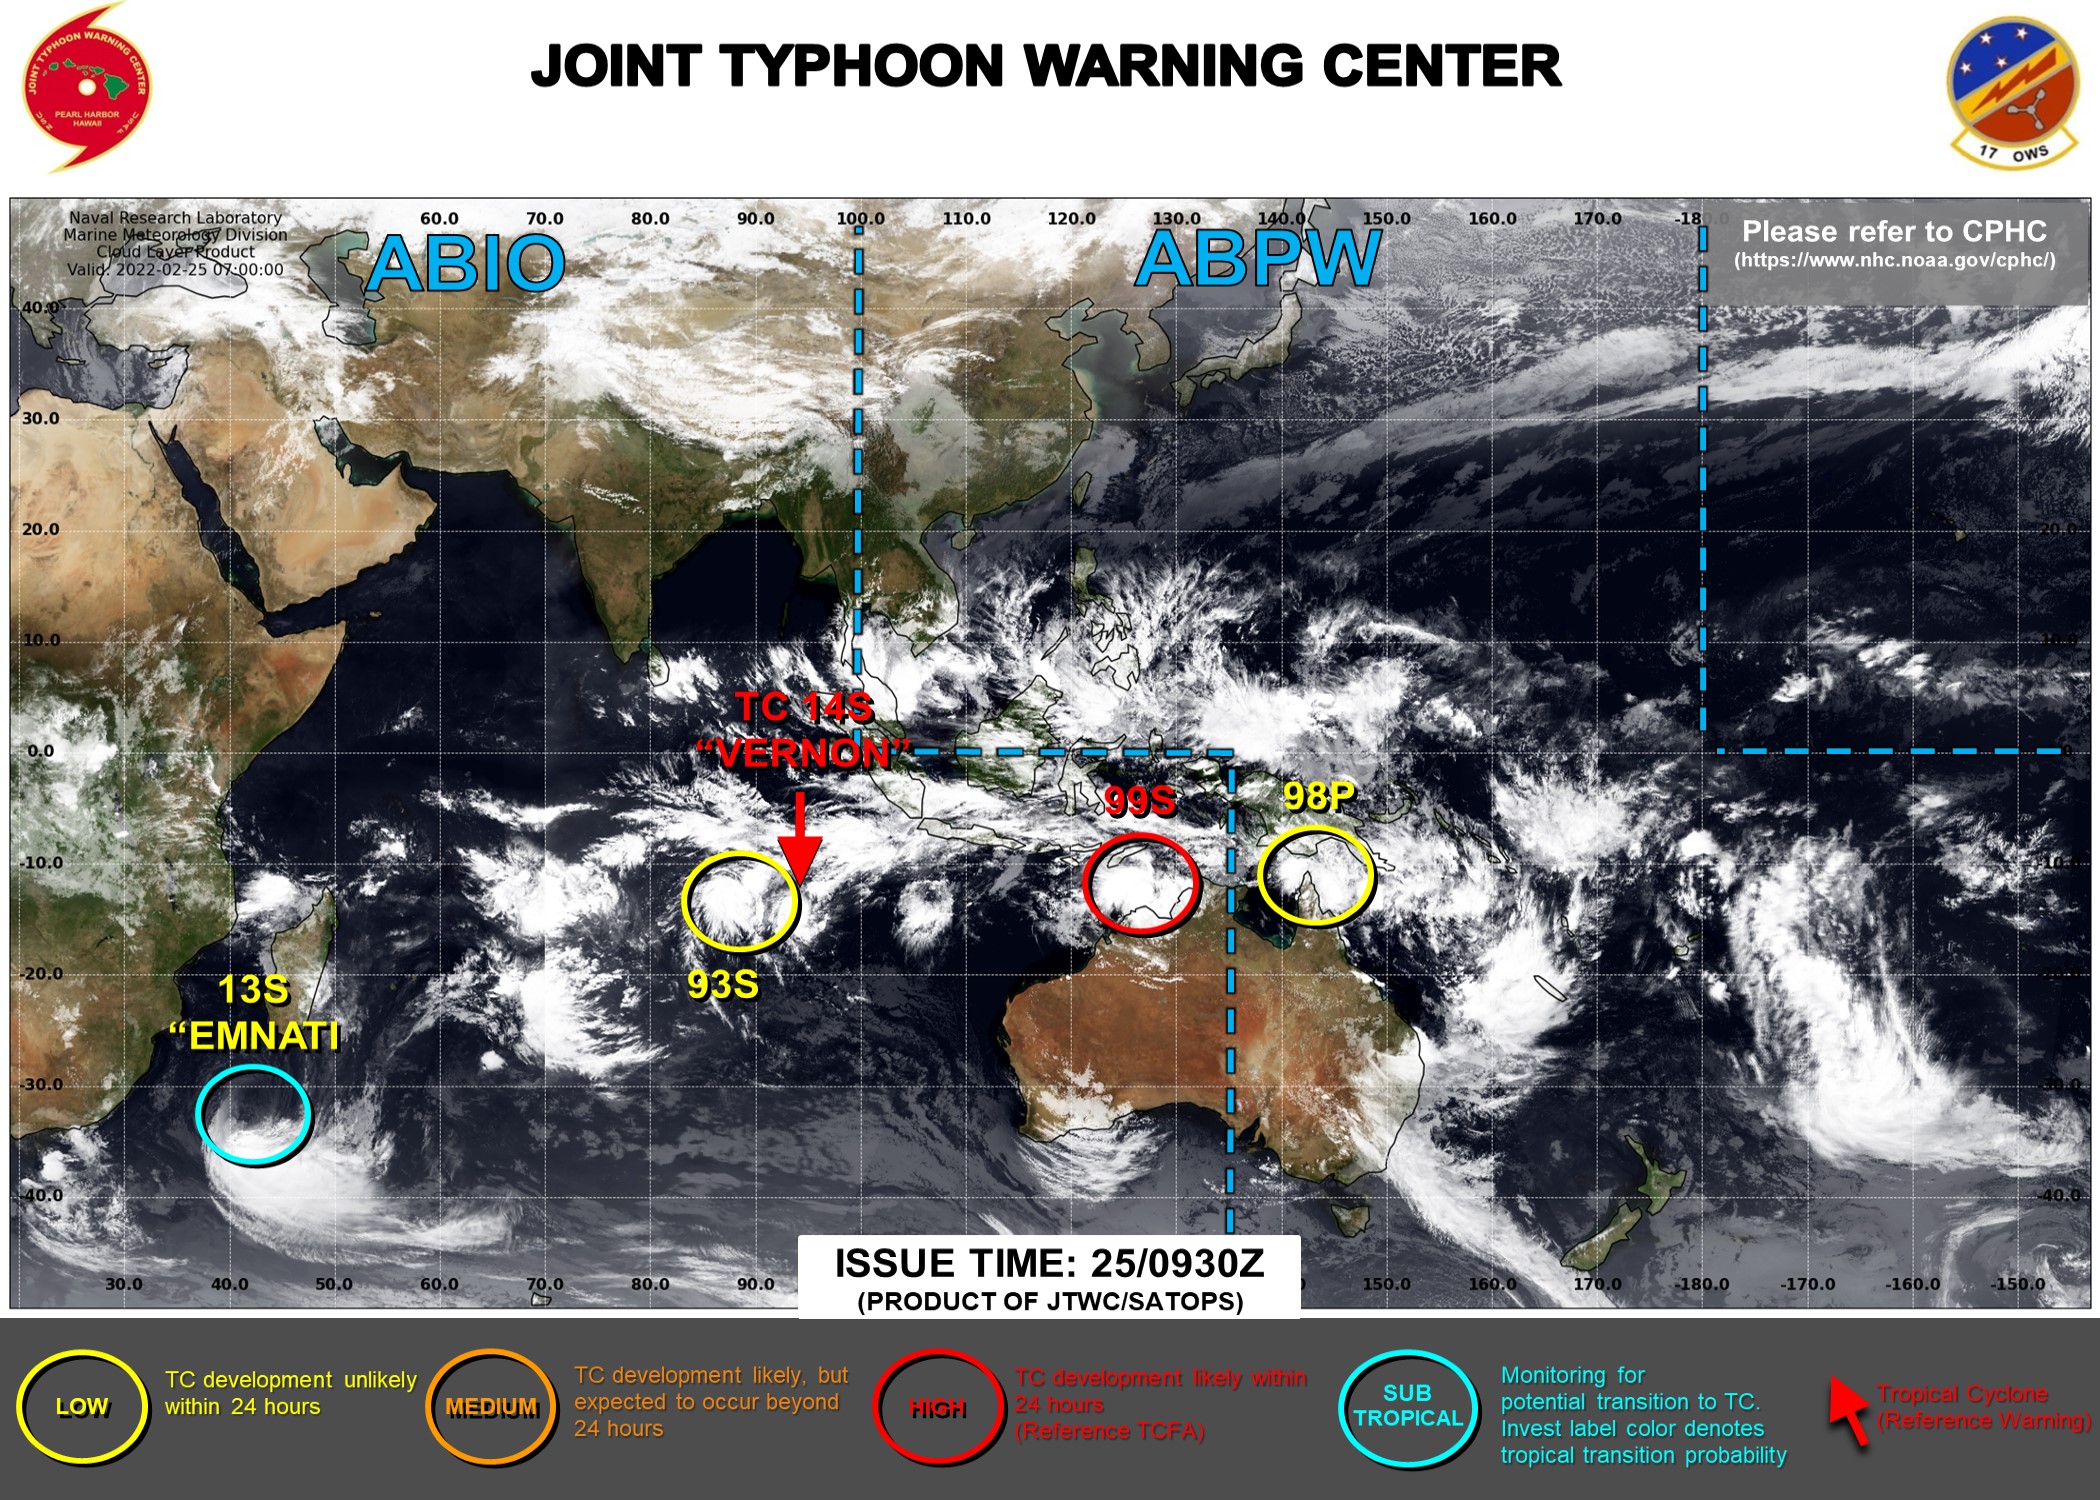 JTWC IS ISSUING 12HOURLY WARNINGS ON TC 14S(VERNON). 3HOURLY SATELLITE BULLETINS ARE ISSUED ON 14S, 99S AND 98P. THEY WERE DISCONTINUED ON 13S(EMNATI) AT 25/0530UTC.